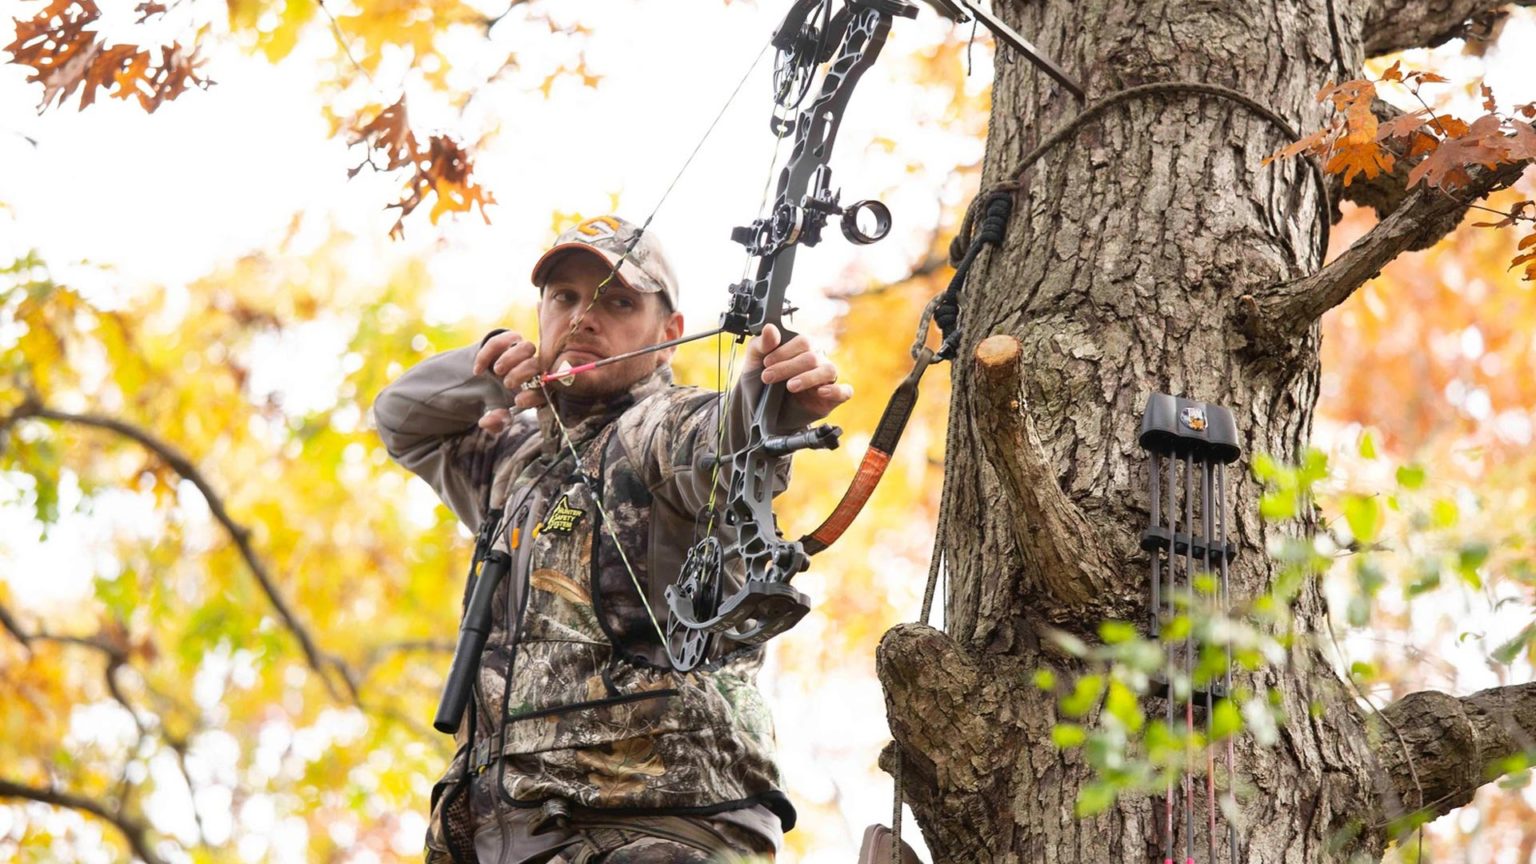 bowhunter at full draw in treestand